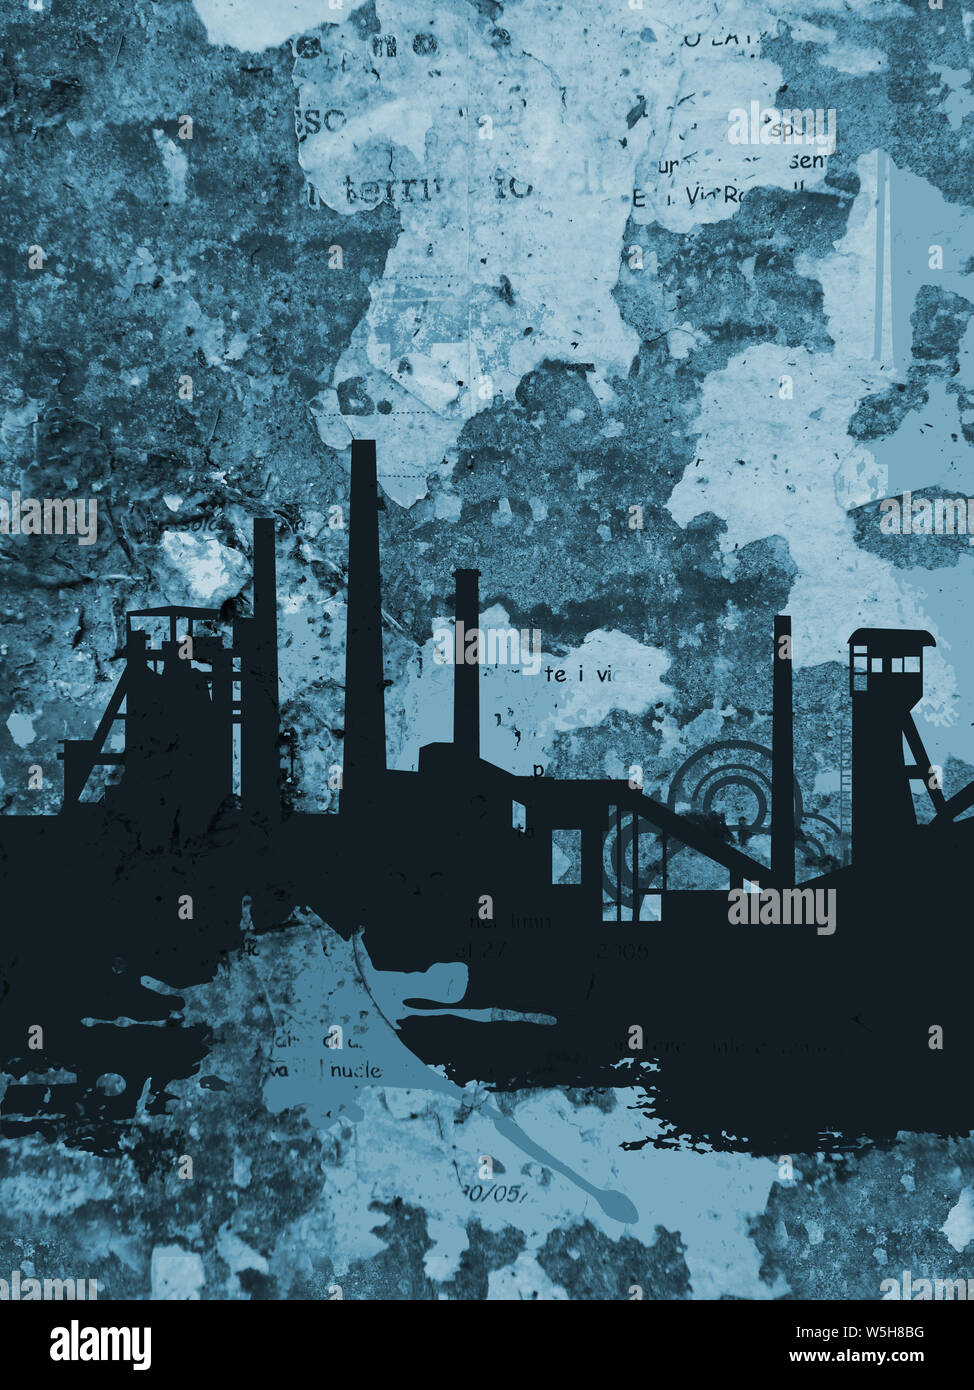 Steelworks silhouette on grunge blue background. Illustration of steelworks black silhouette on grunge background of torn fragmentes of posters. Stock Photo